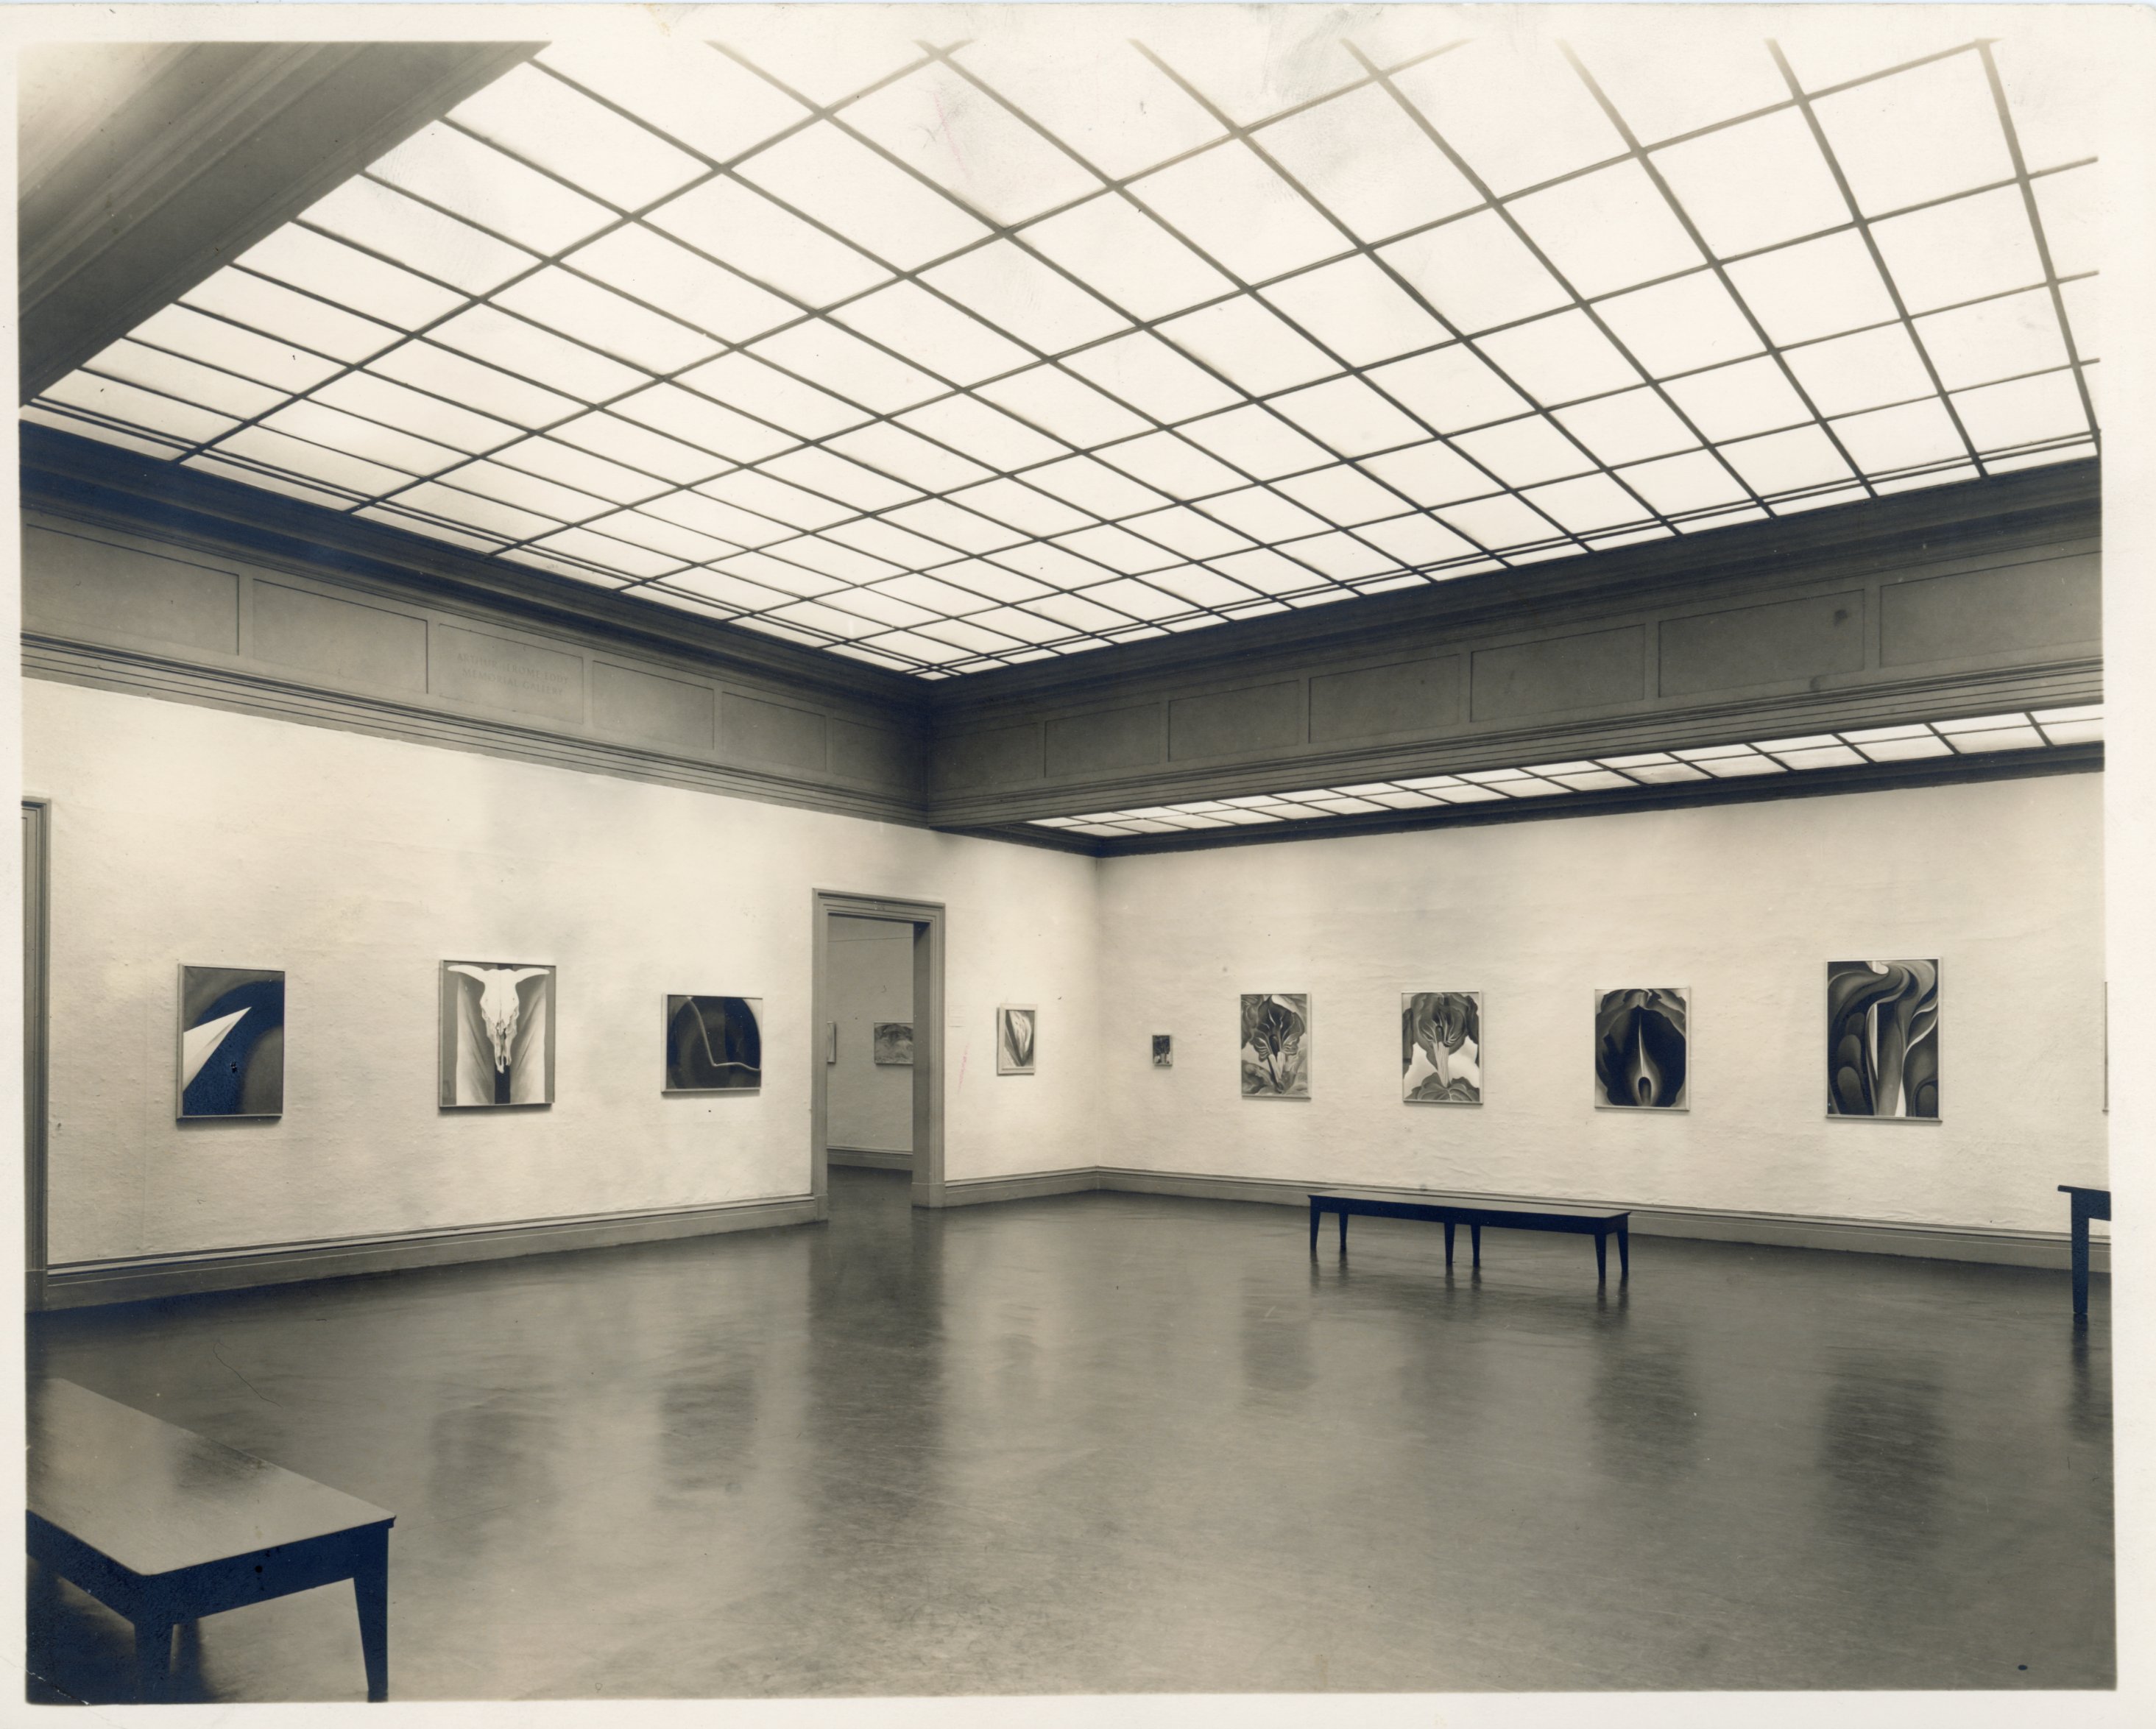 Black and white photograph. We look into the far corner of a gallery space, with nine paintings lining the walls to either side of an opening, near the far corner. The paintings show flame-like petals, an animal skull, or abstracted, geometric shapes. The grid of lights above reflects in the dark, shiny floor below. In this view, we see three wooden benches placed along the perimeter of the room.